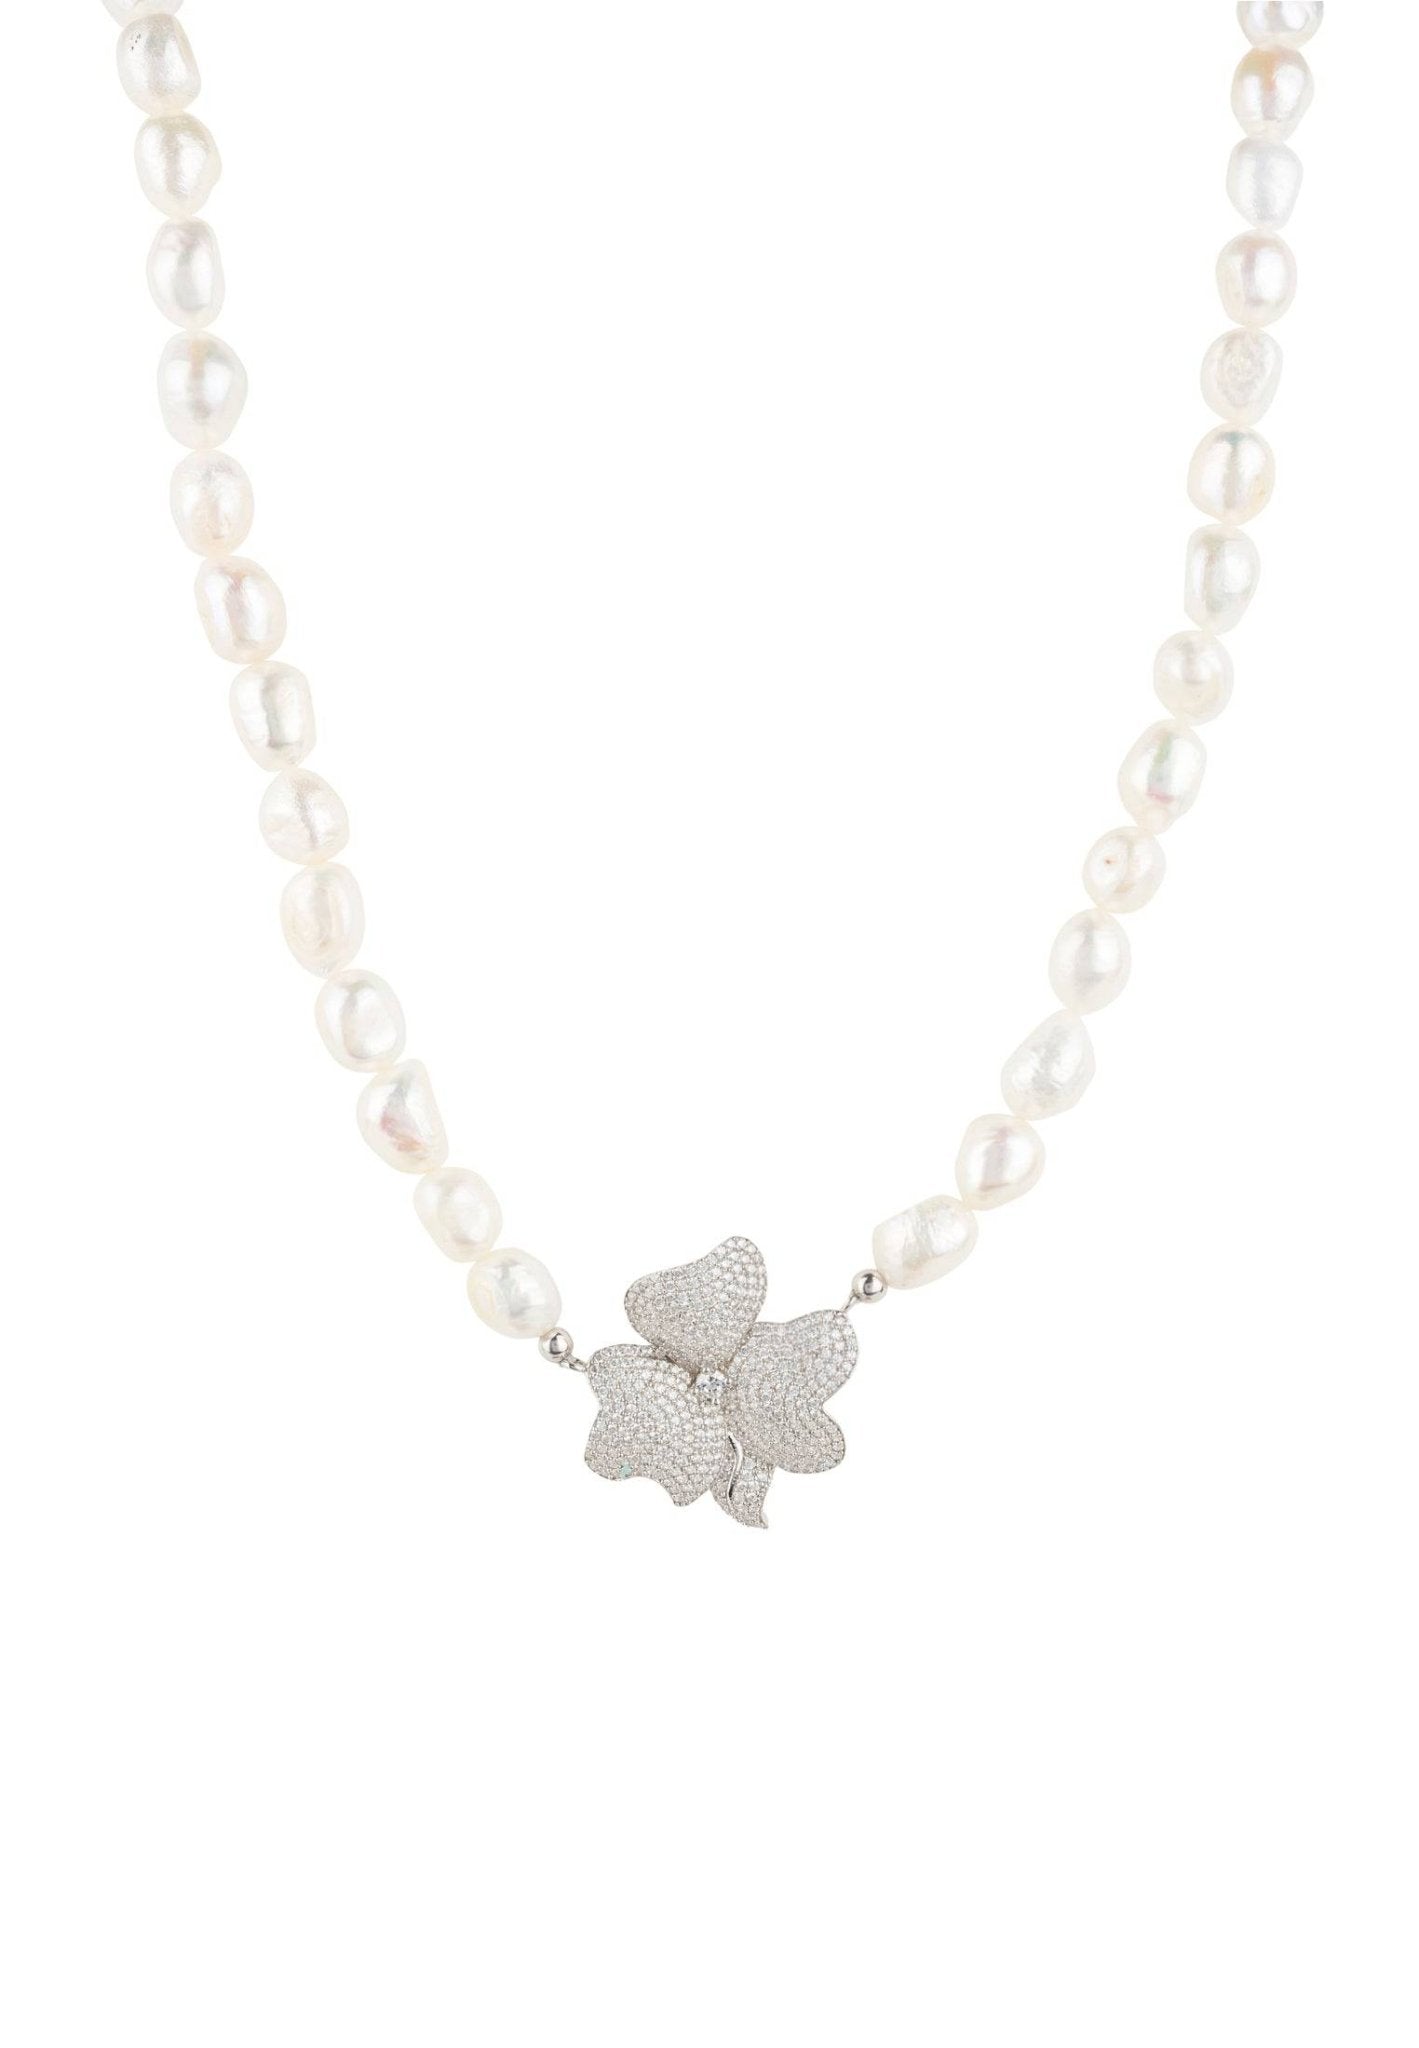 Flower Pearl Mid Length Necklace White Cz Silver - LATELITA Necklaces